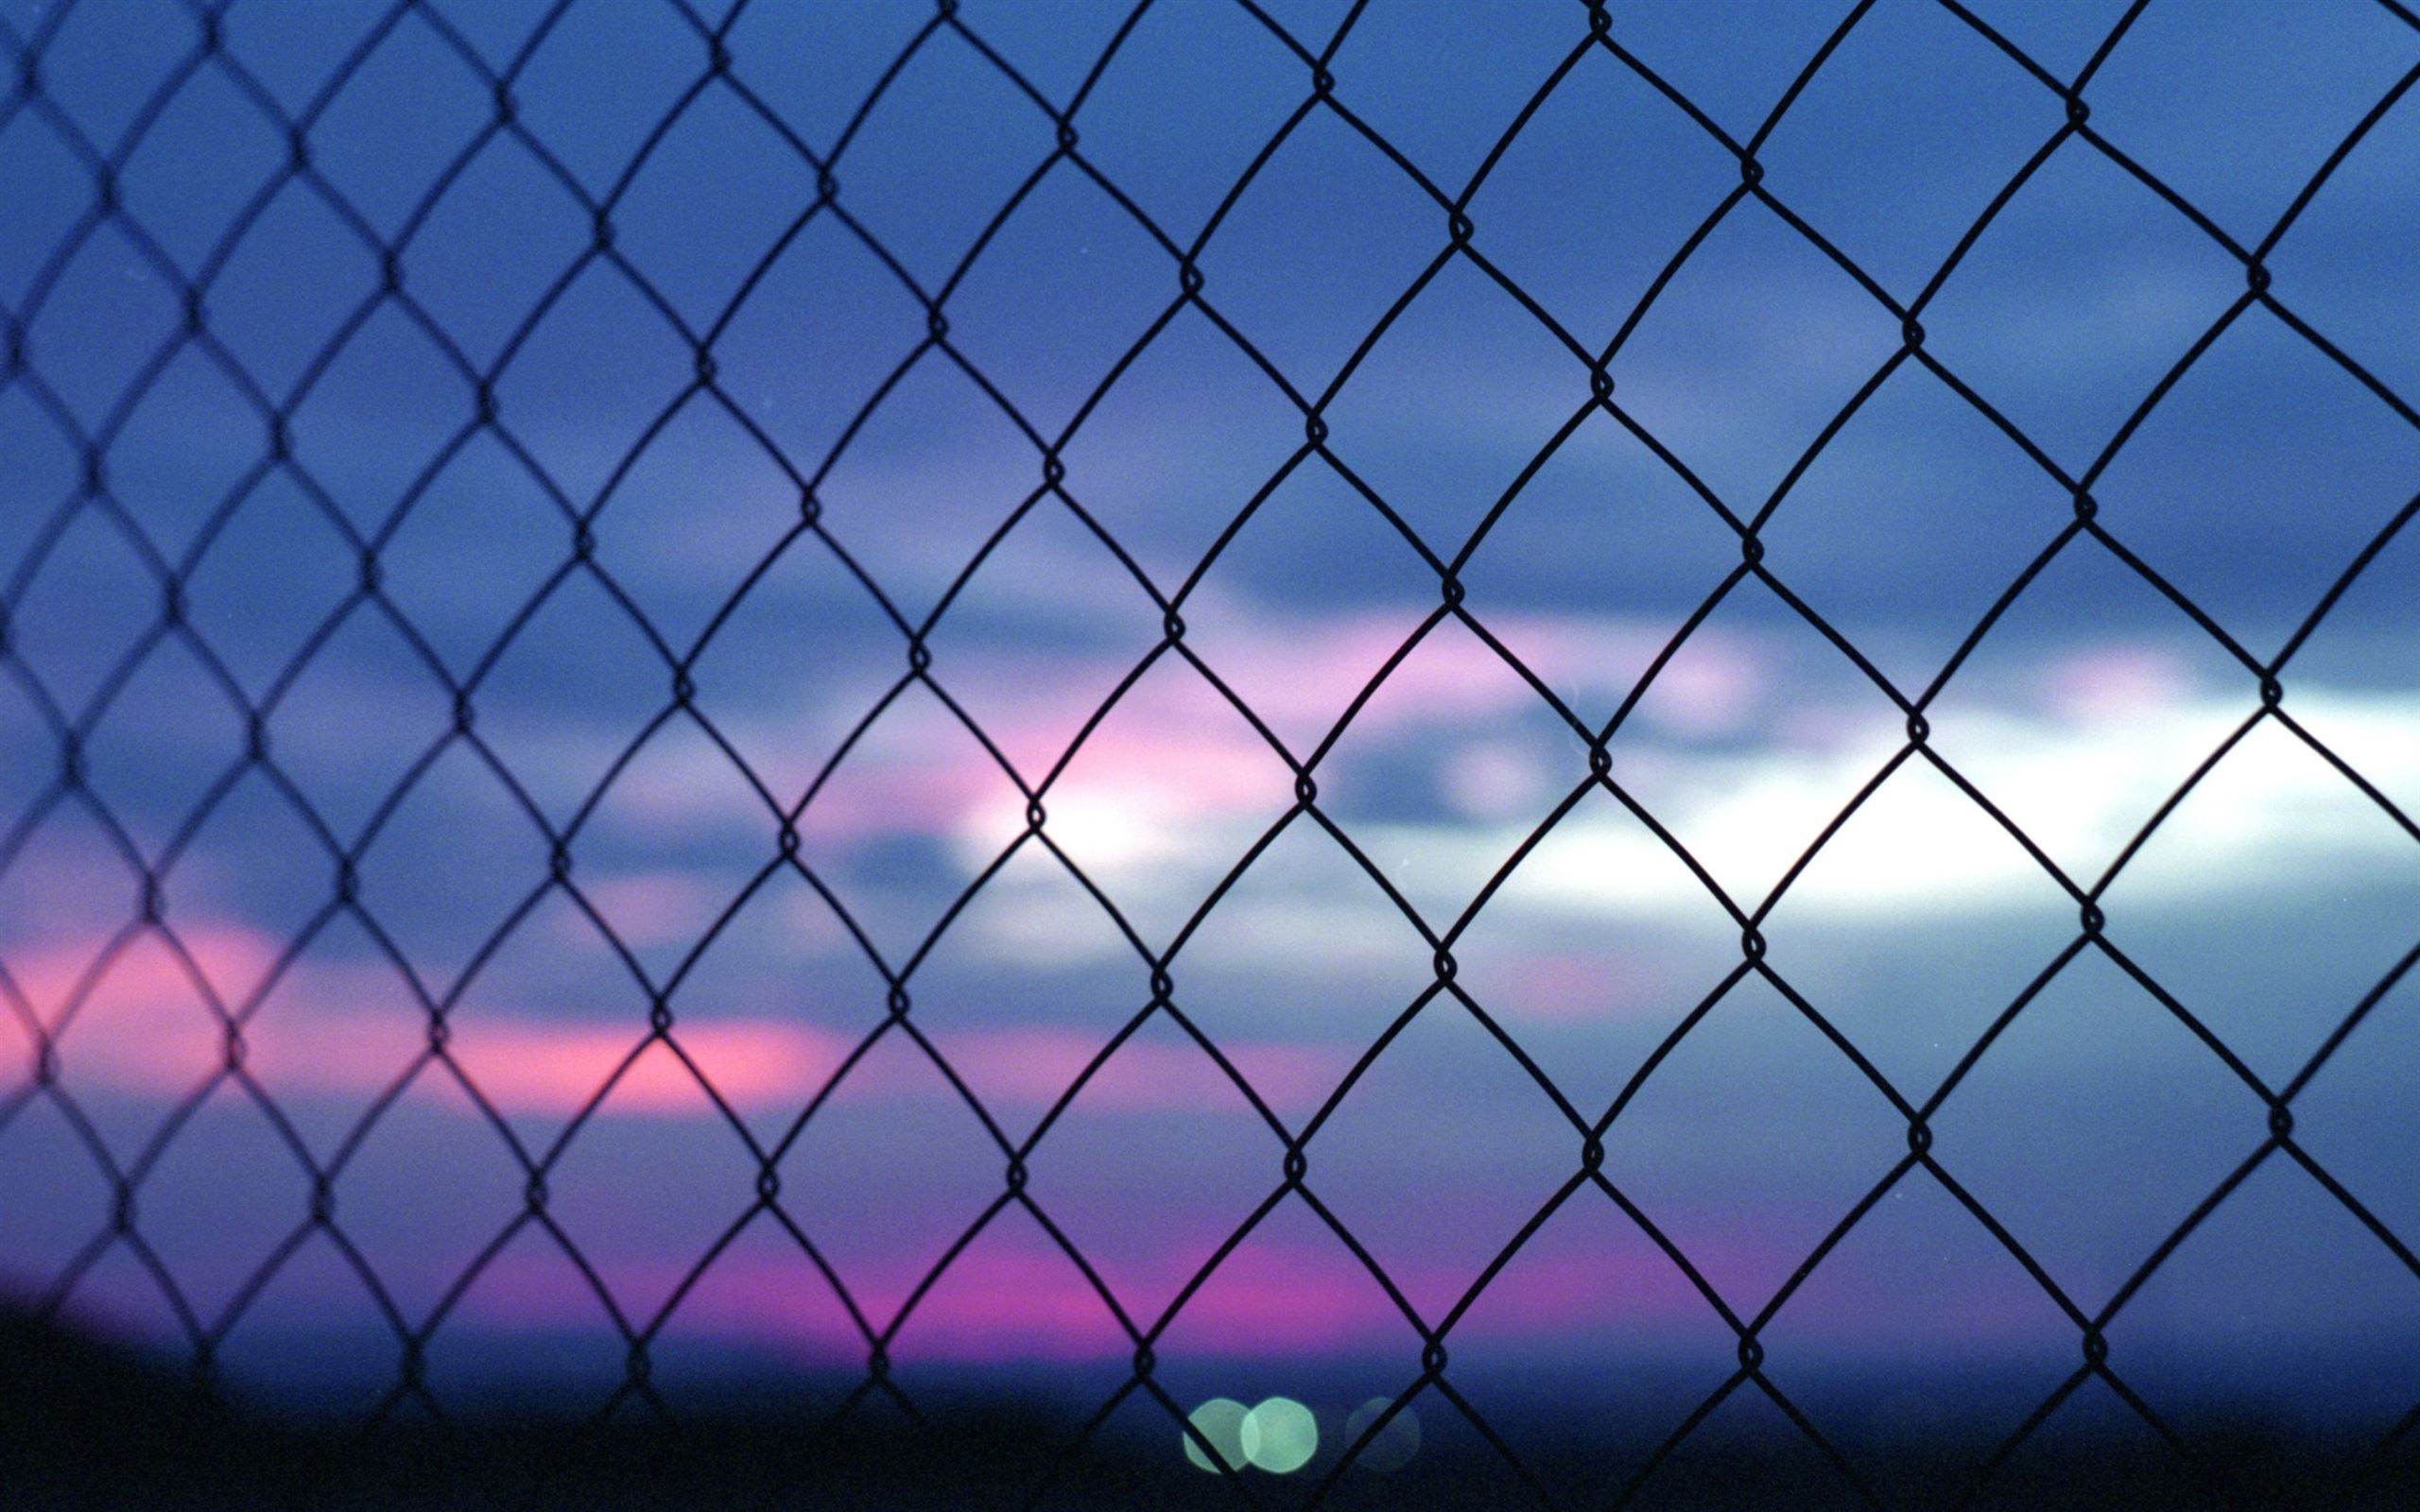 A fence in front of a beautiful sunset - Diamond